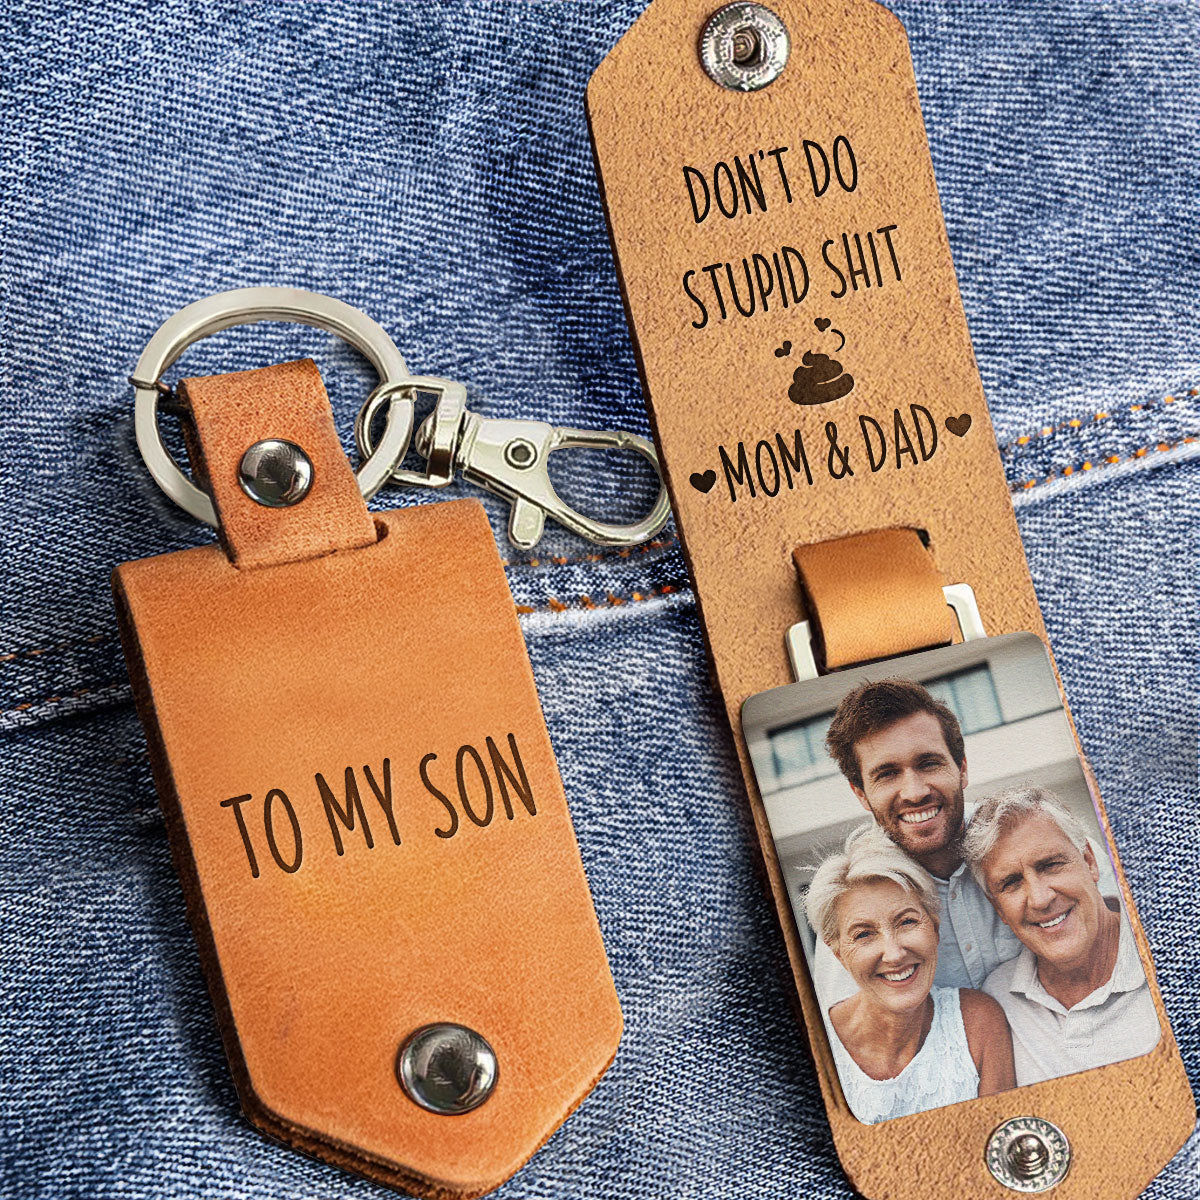 https://macorner.co/cdn/shop/files/Don_T-Do-Stupid-Shit-For-Kids_-Son_-Daughter-Personalized-Leather-Photo-Keychain_3.1.jpg?v=1704442047&width=1946